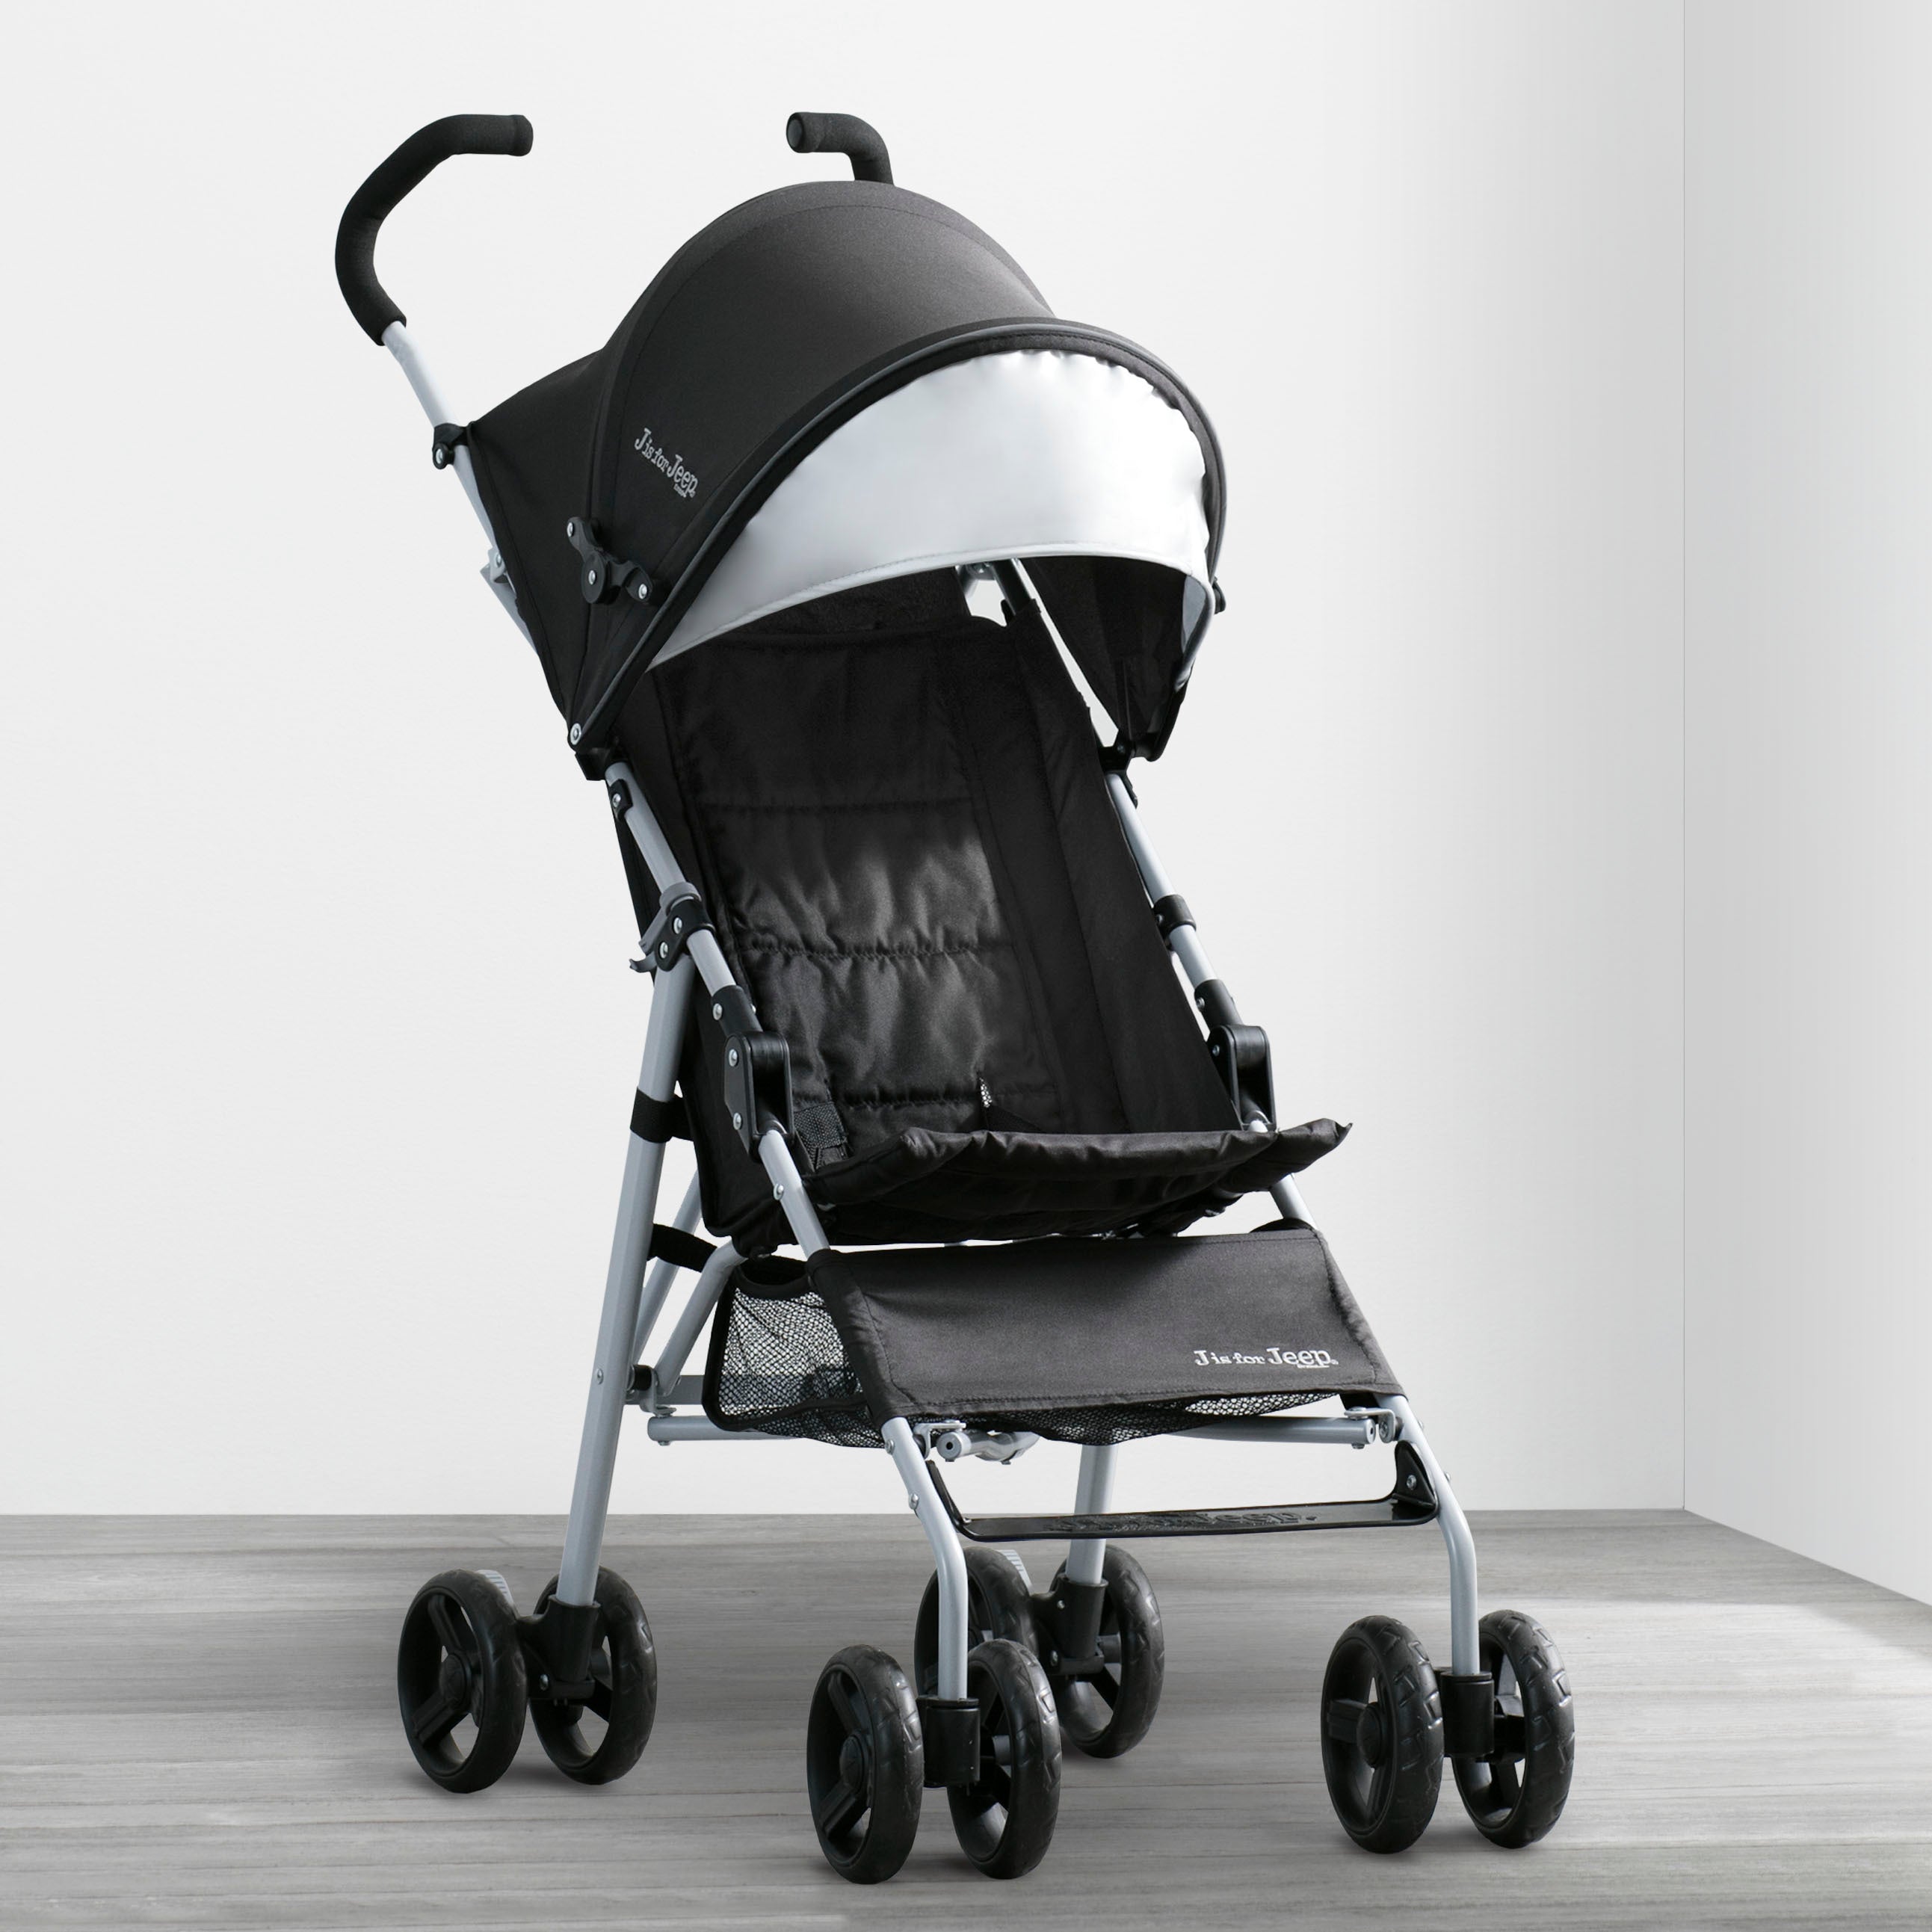 jis for jeep stroller